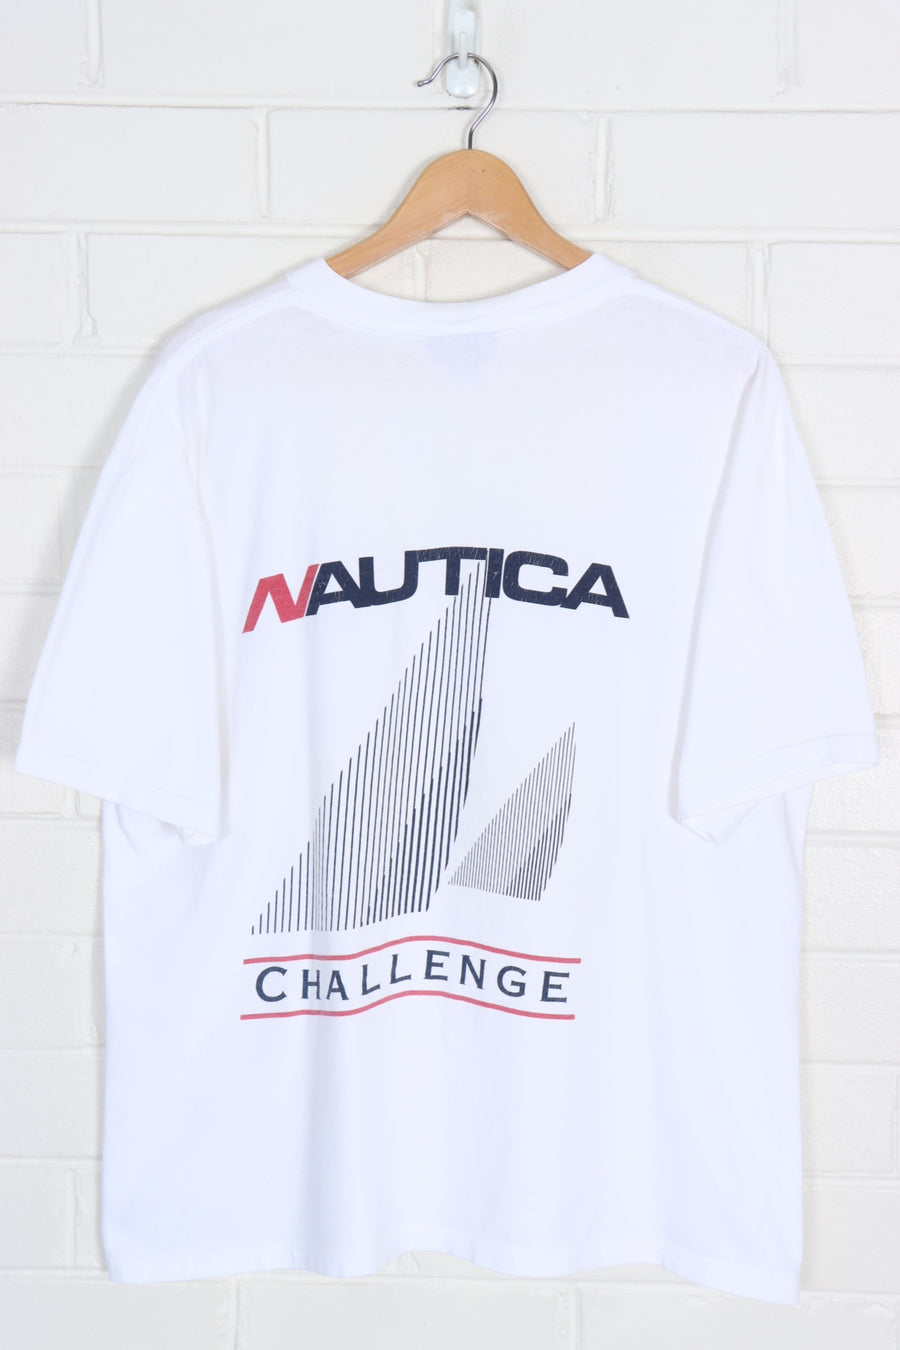 NAUTICA 'Challenge' Front & Back Spell Out Tee USA Made (L-XL)